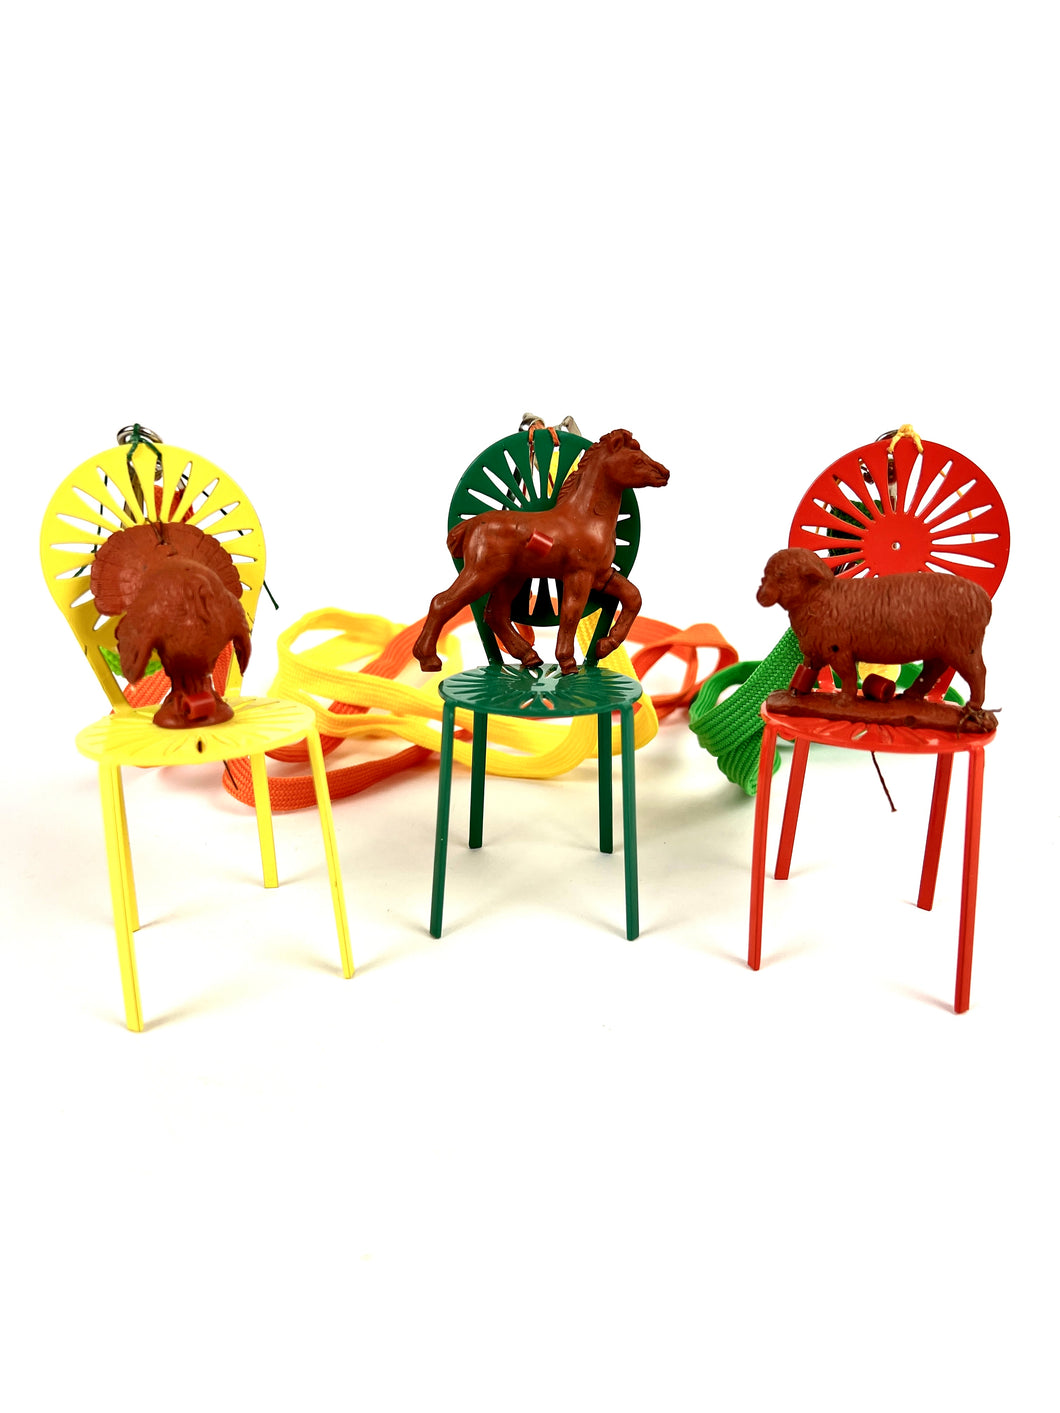 A Seat At the Table Trio: Fanny the Turkey, Lariat the Horse, Peanut the Sheep